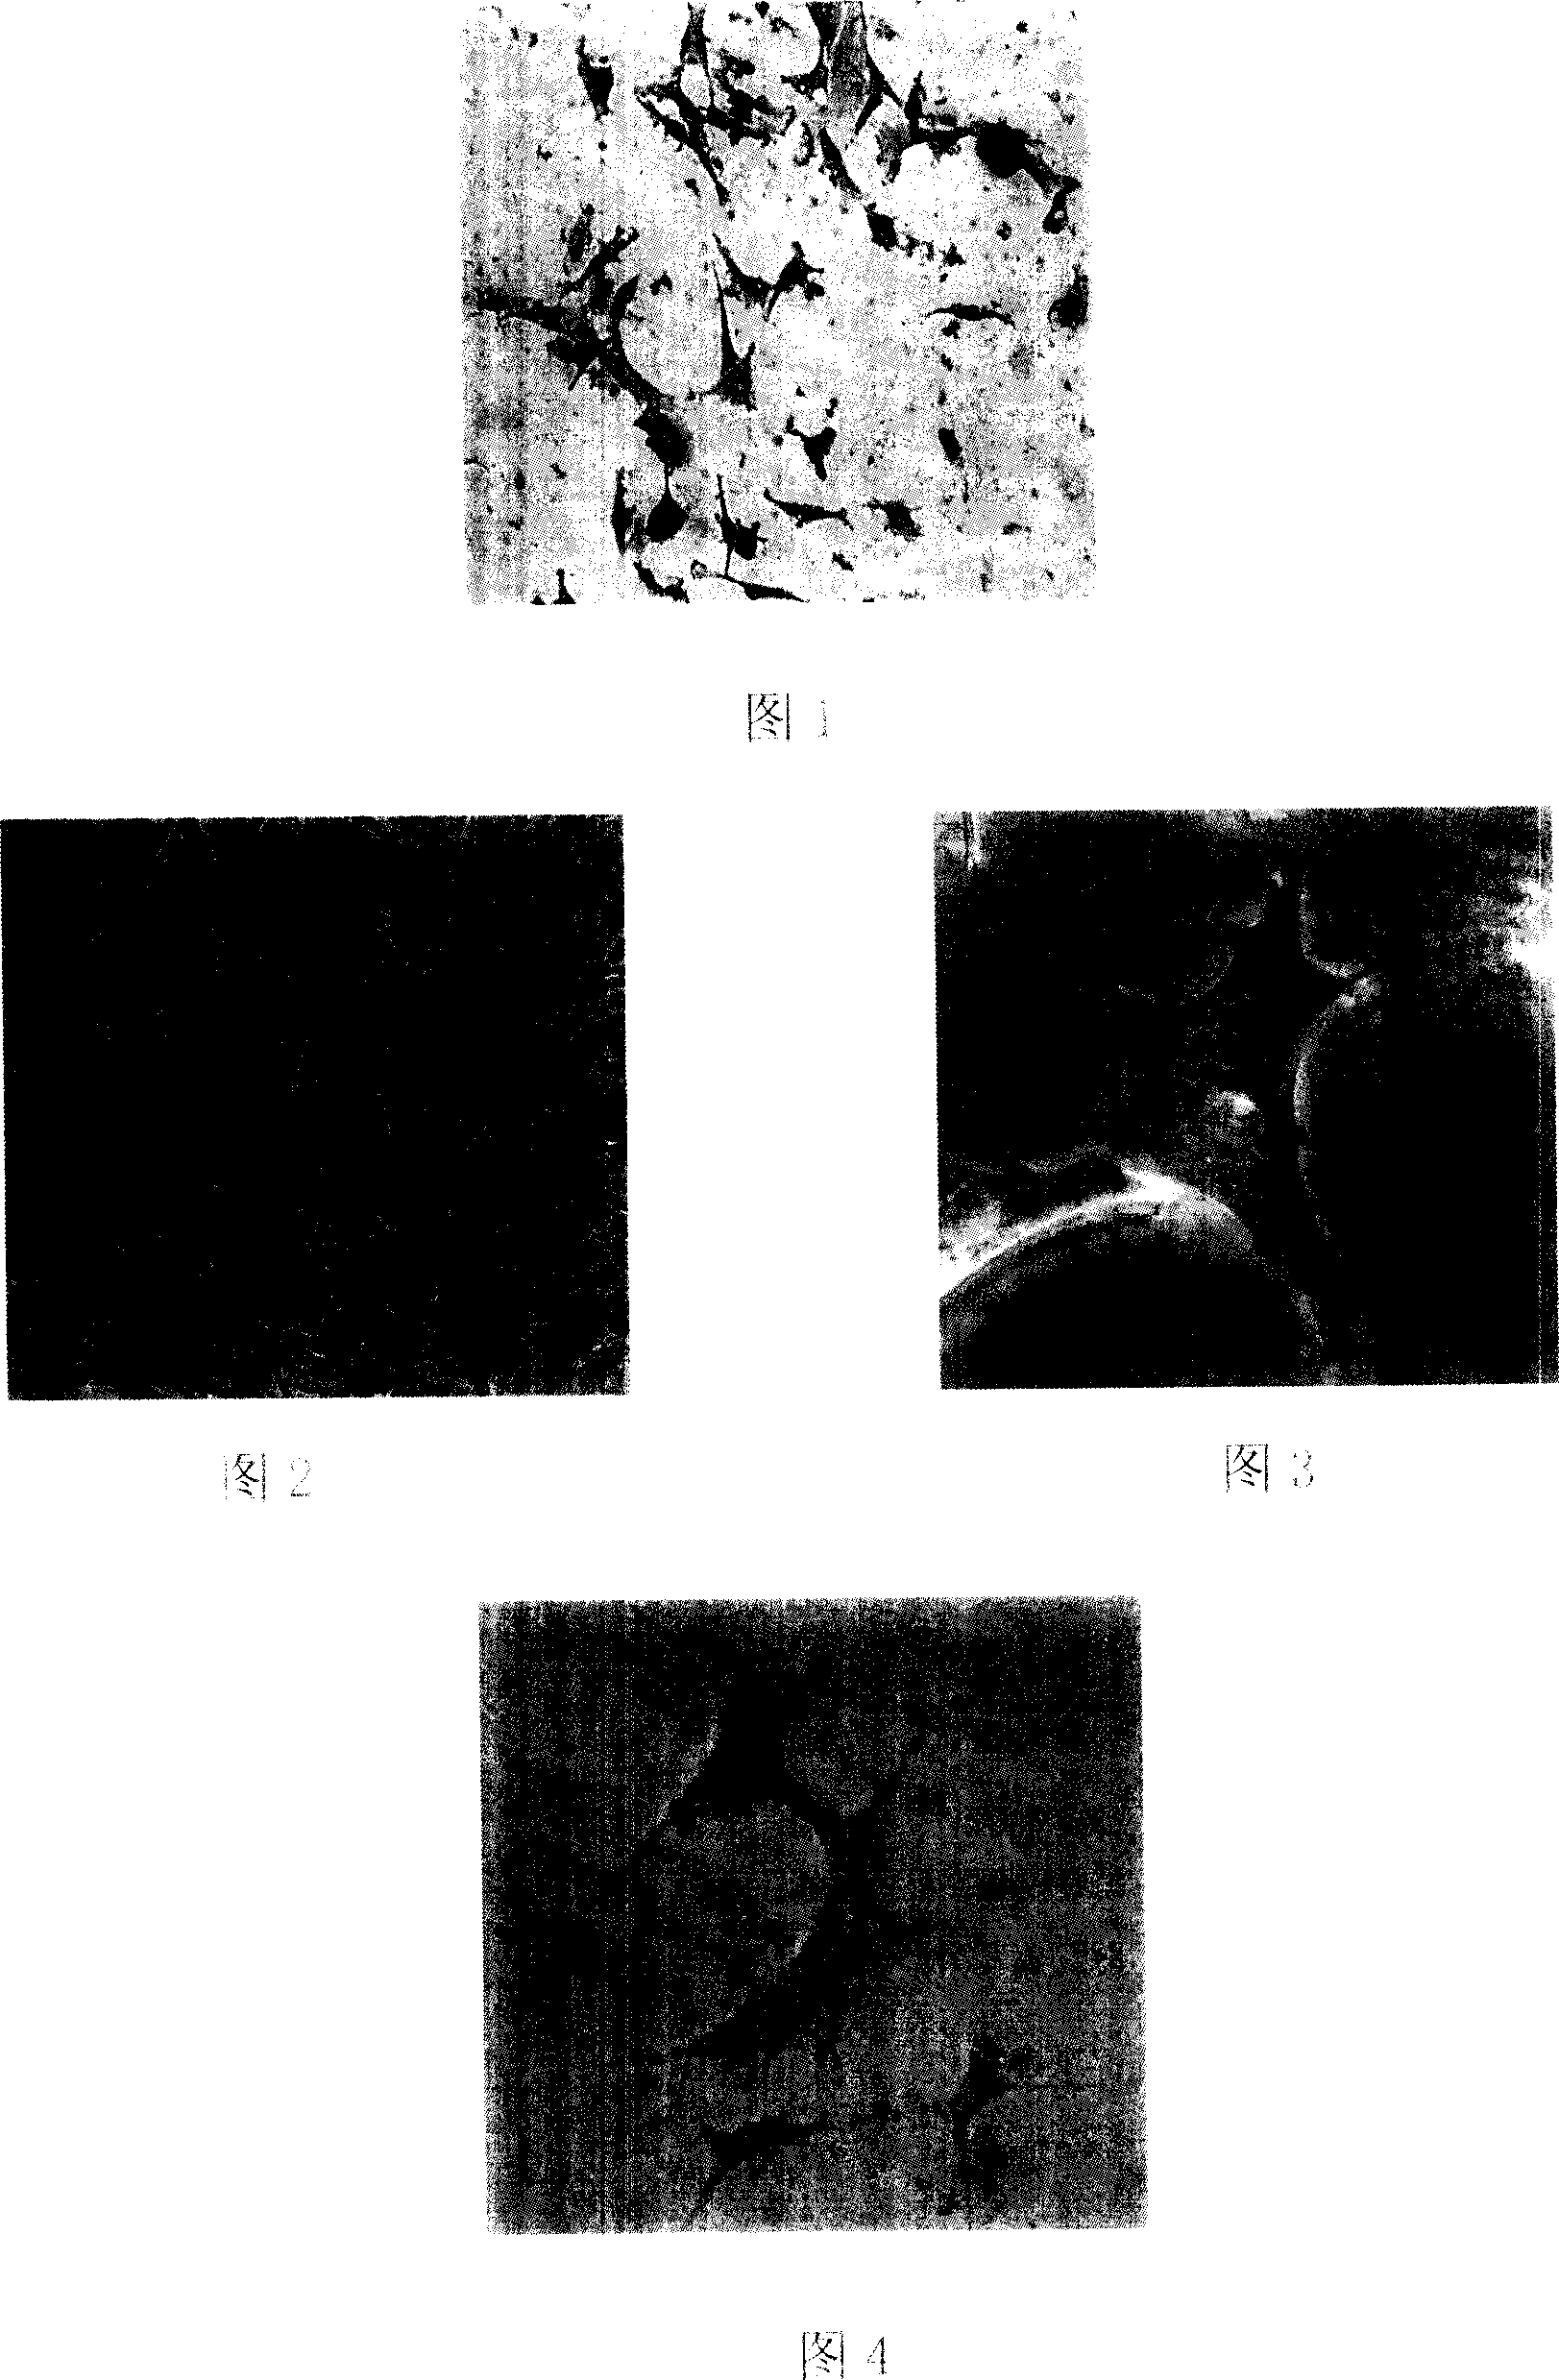 Method for differentiating osteoplastic cells by oriented inducing chick embryo primordial germ cell